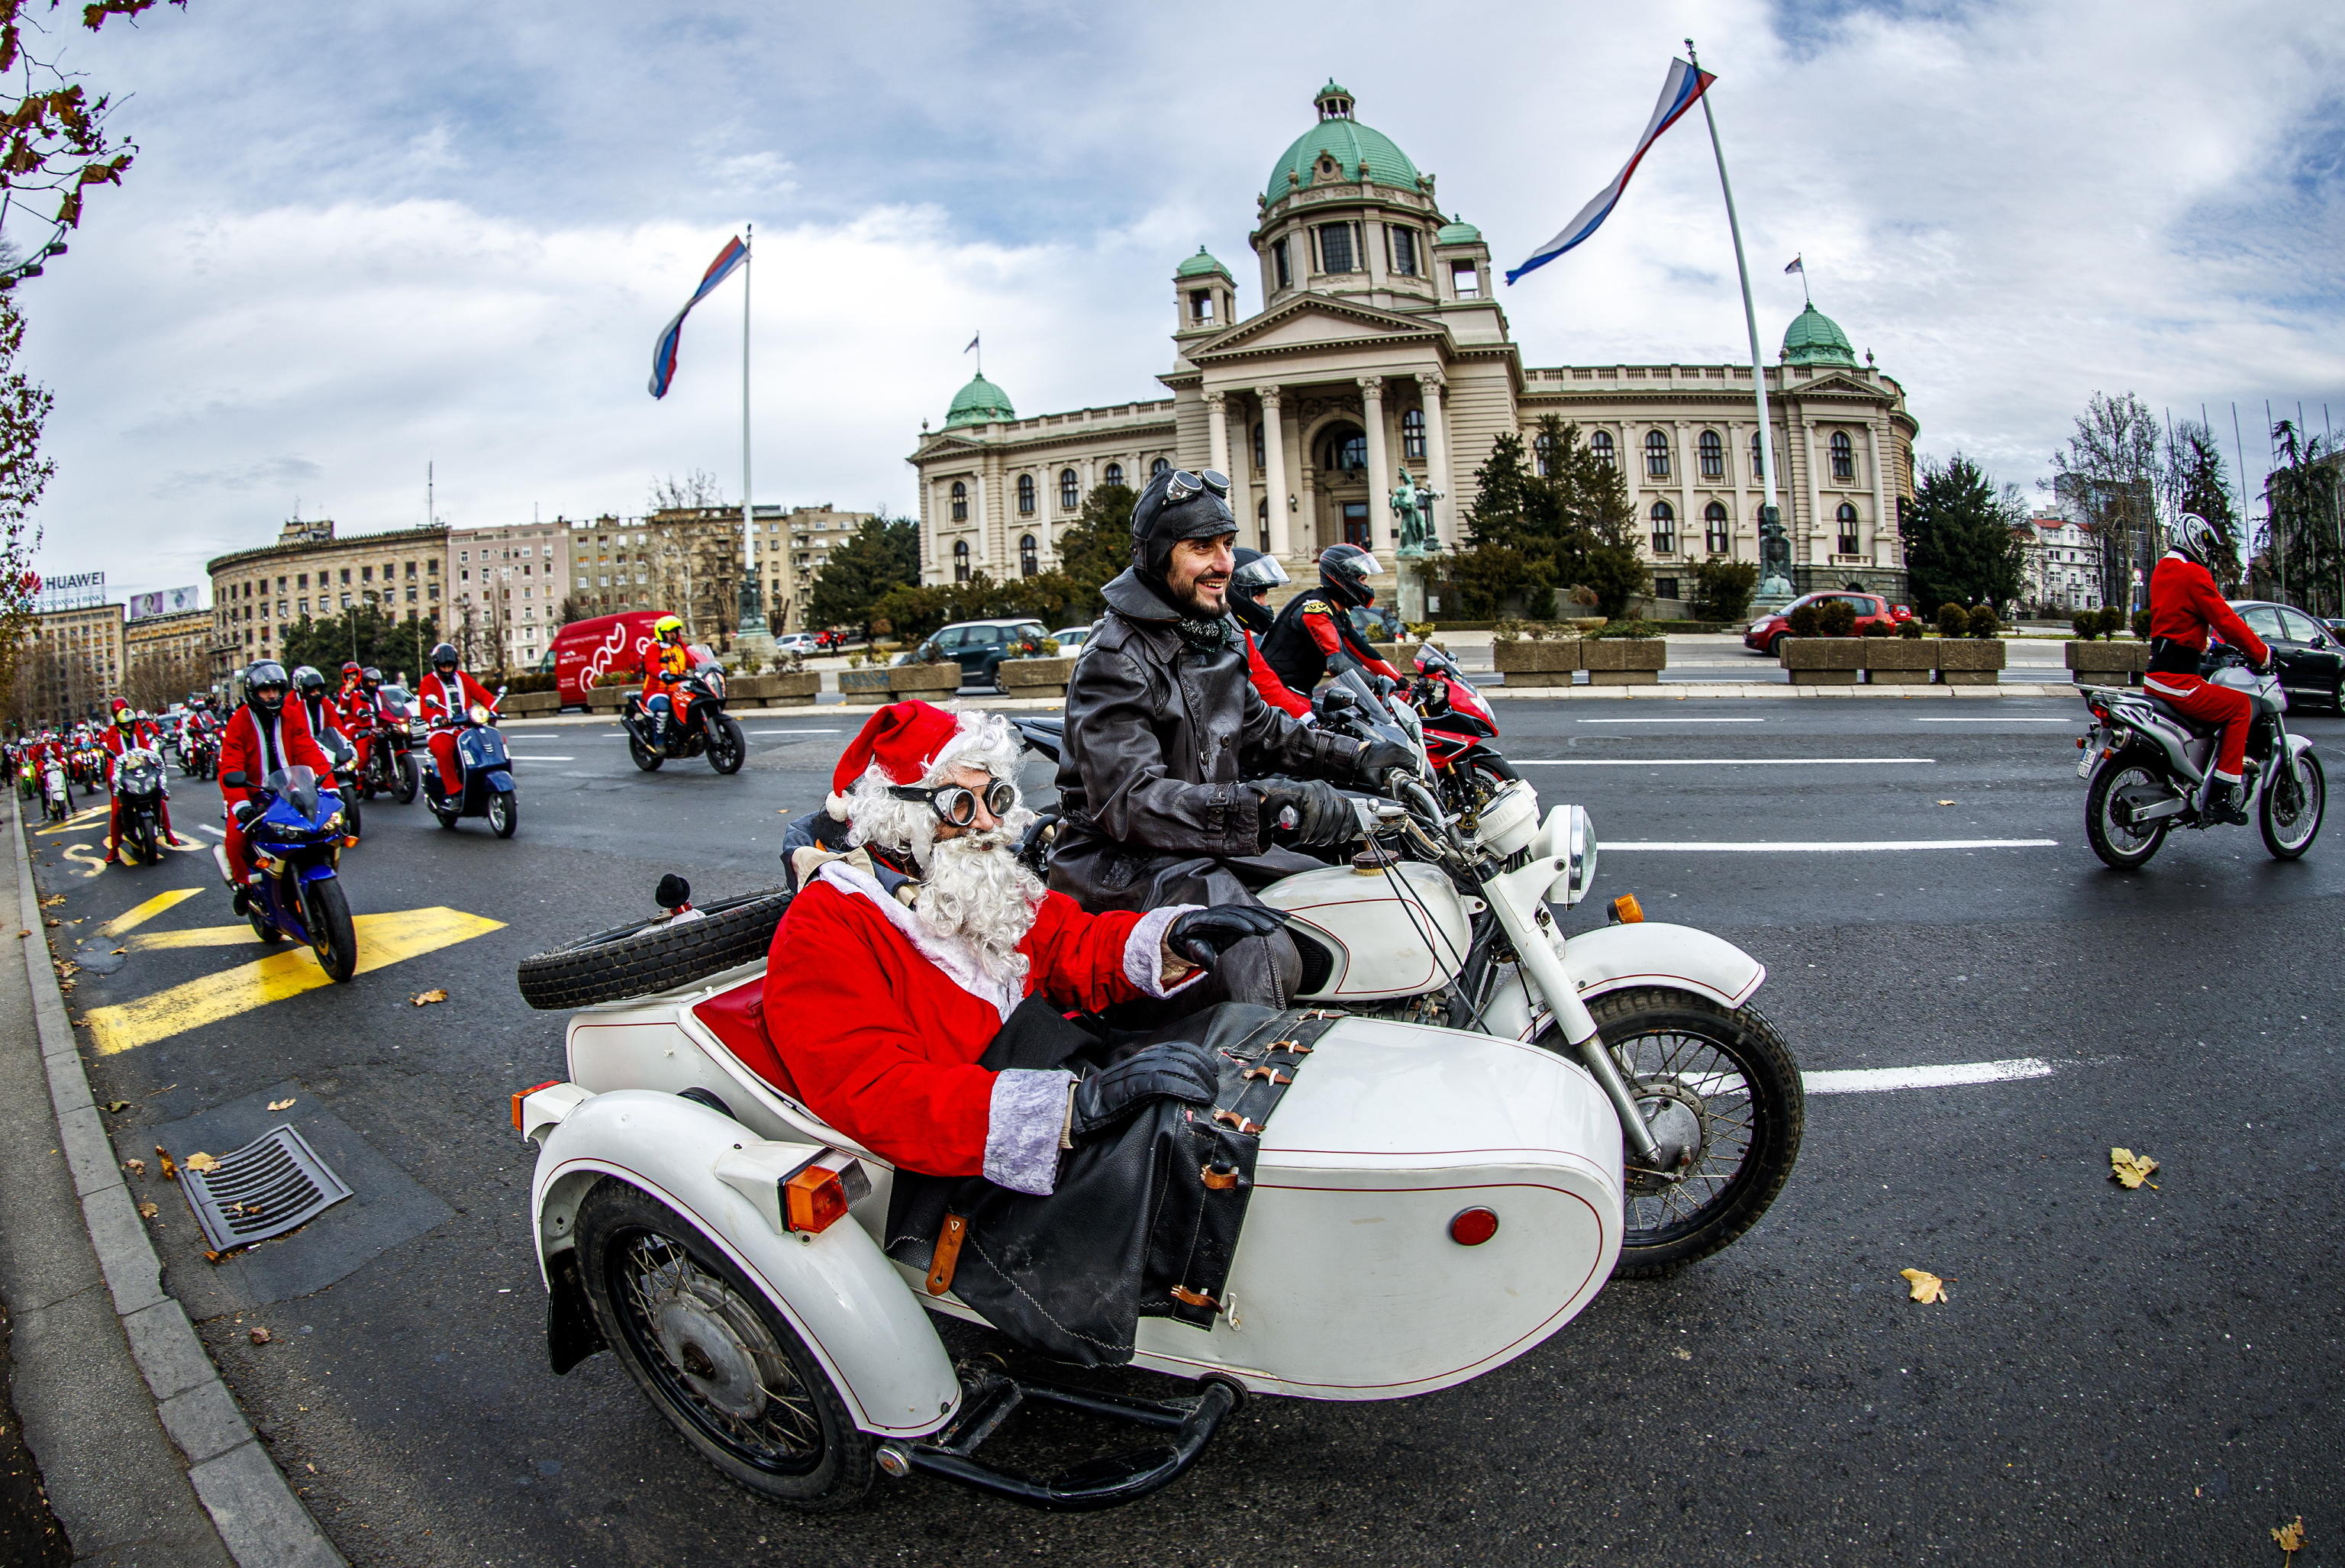 epa08084752 A Serbian motorcyclists dressed in Santa costume drive through the streets of the city center of Belgrade, Serbia, 21 December 2019. A group of Serbian motorcycle enthusiasts gathered in the Serbian capital for a joint ride to the bring Christmas gifts for underprivileged children.  EPA/SRDJAN SUKI